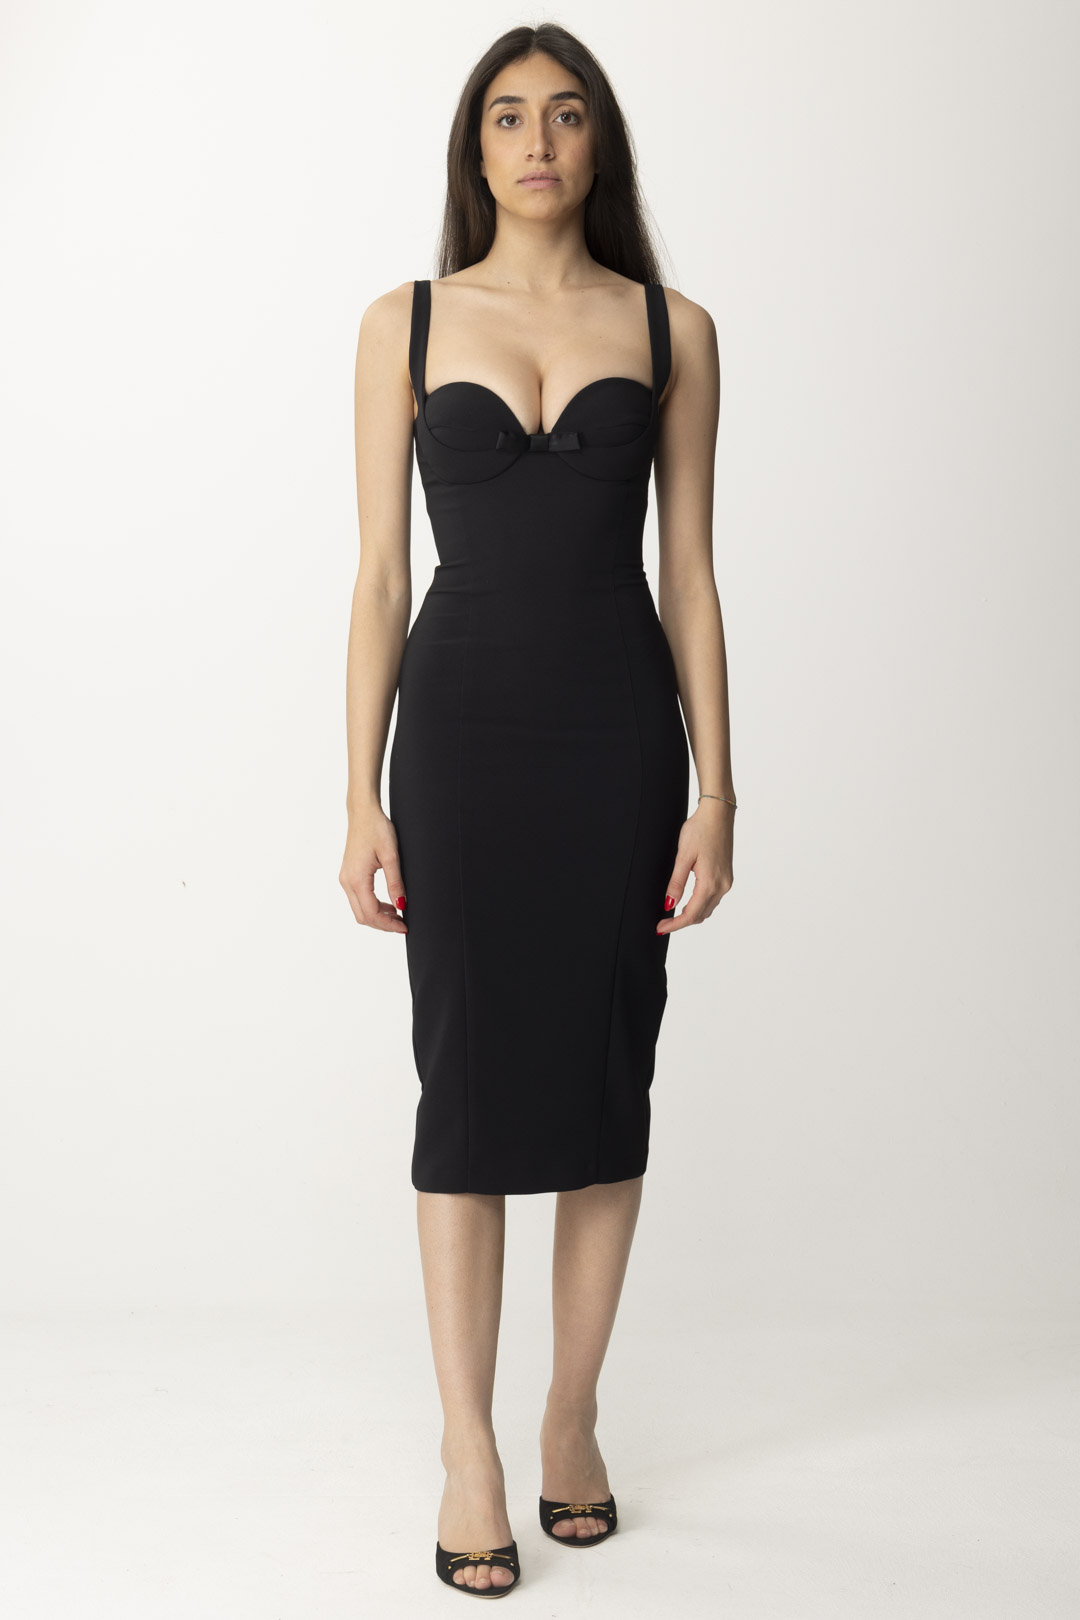 Preview: Elisabetta Franchi Crepe Sheath Dress with Bow Nero